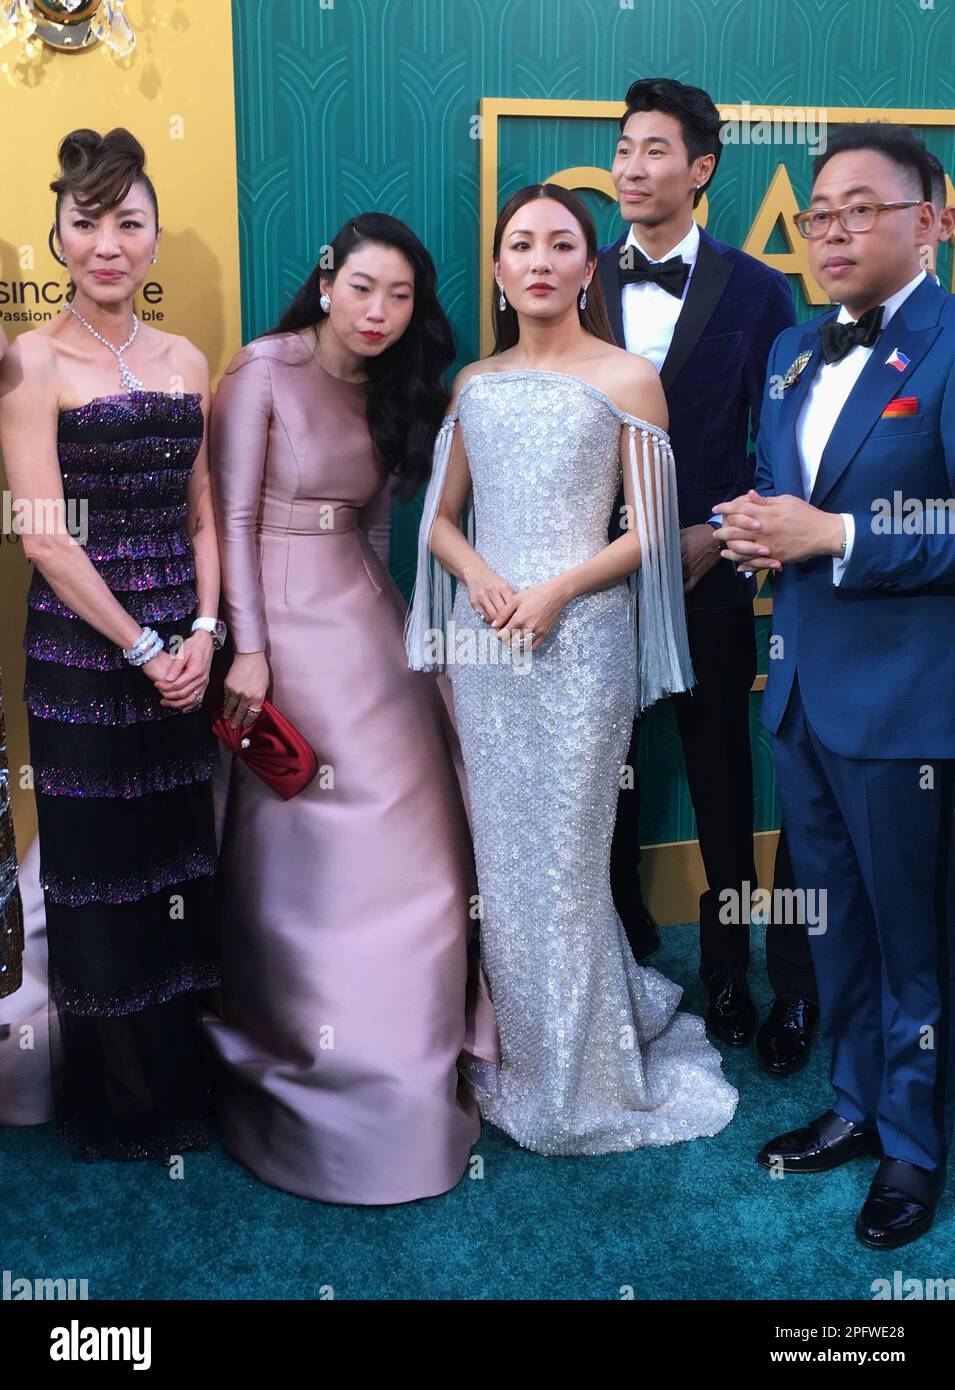 Michelle Yeoh, Awkwafina, Constance Wu 144 arrives at the Warner Bros. Pictures' 'Crazy Rich Asians' premiere at the TCL Chinese Theatre IMAX on August 7, 2018 in HollywoodRichard Belzer, Comedian and Law & Order- SVU Mainstay, Dead at 78    © Tsuni / USA Michelle Yeoh, Awkwafina, Constance Wu 144 Stock Photo